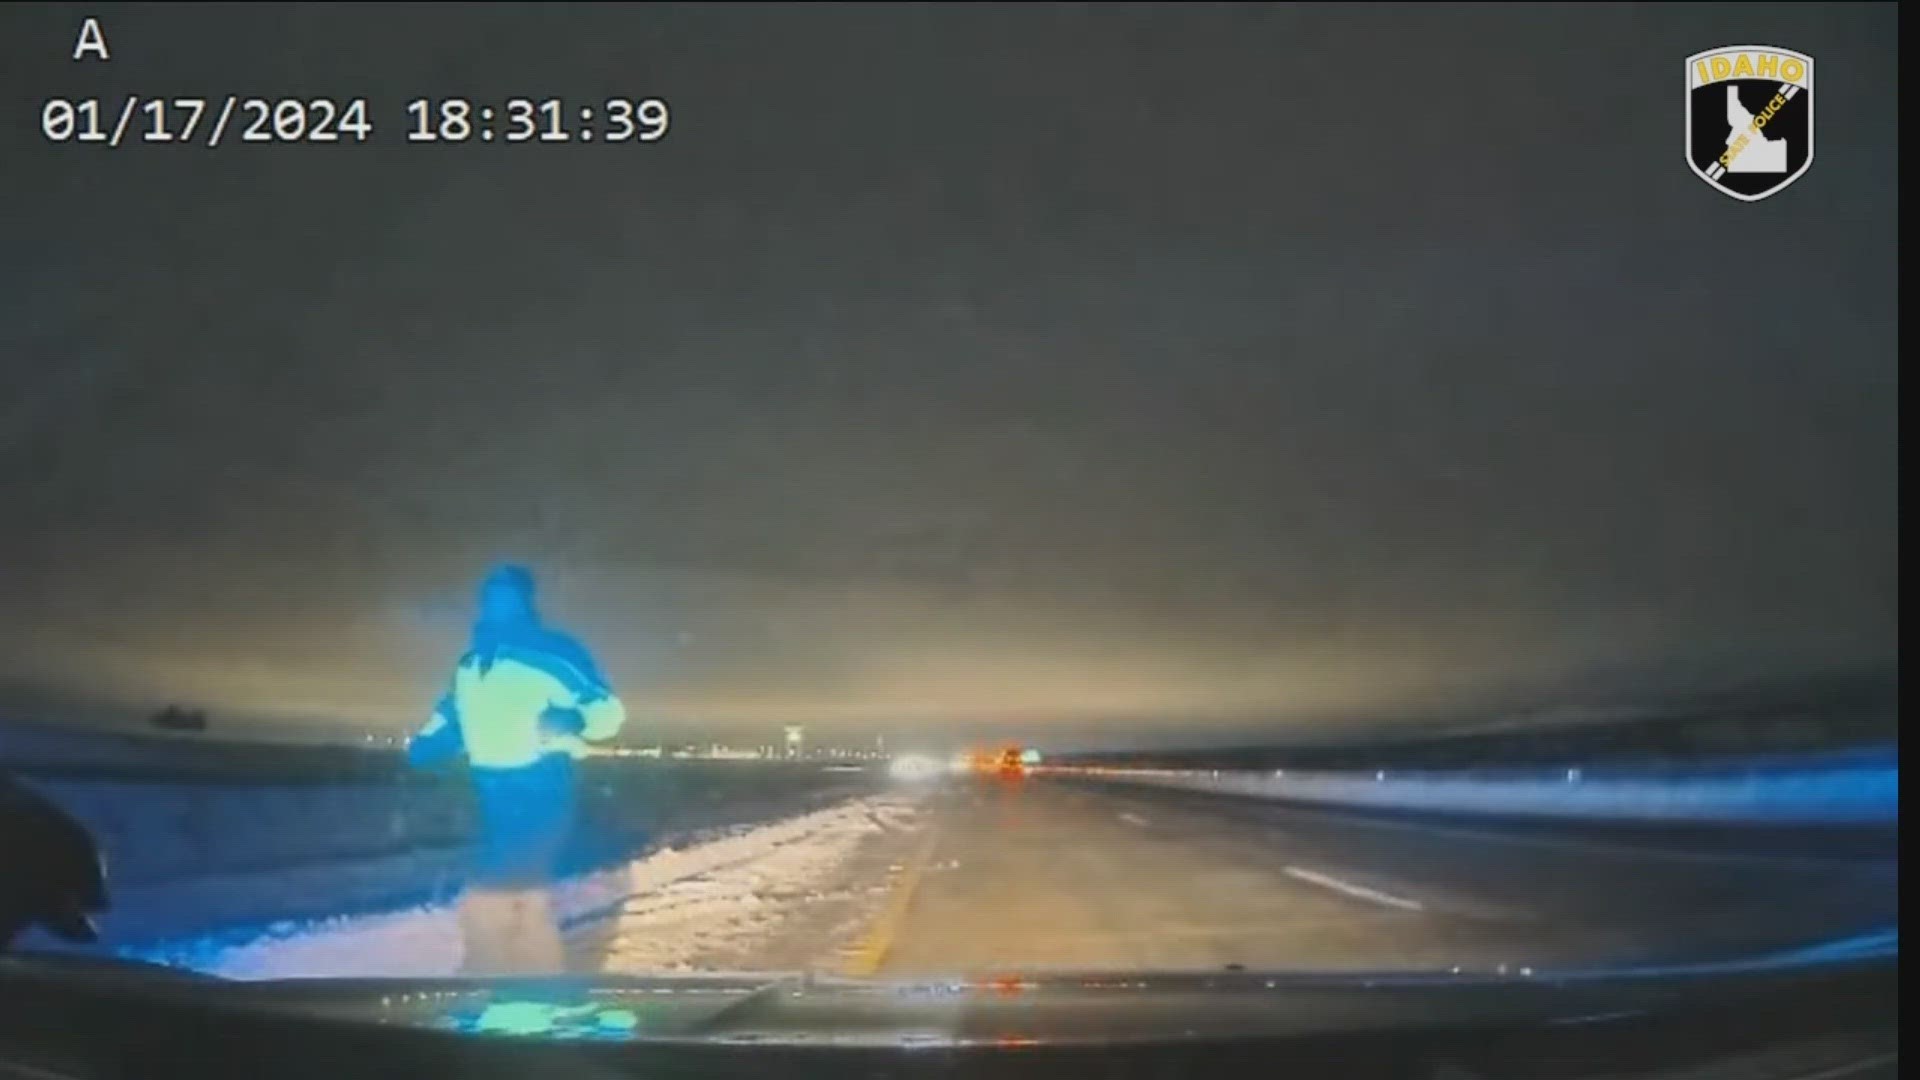 To remind the public of road safety, the Idaho State Police shared a video of a trooper working when a semi-truck almost hit him.